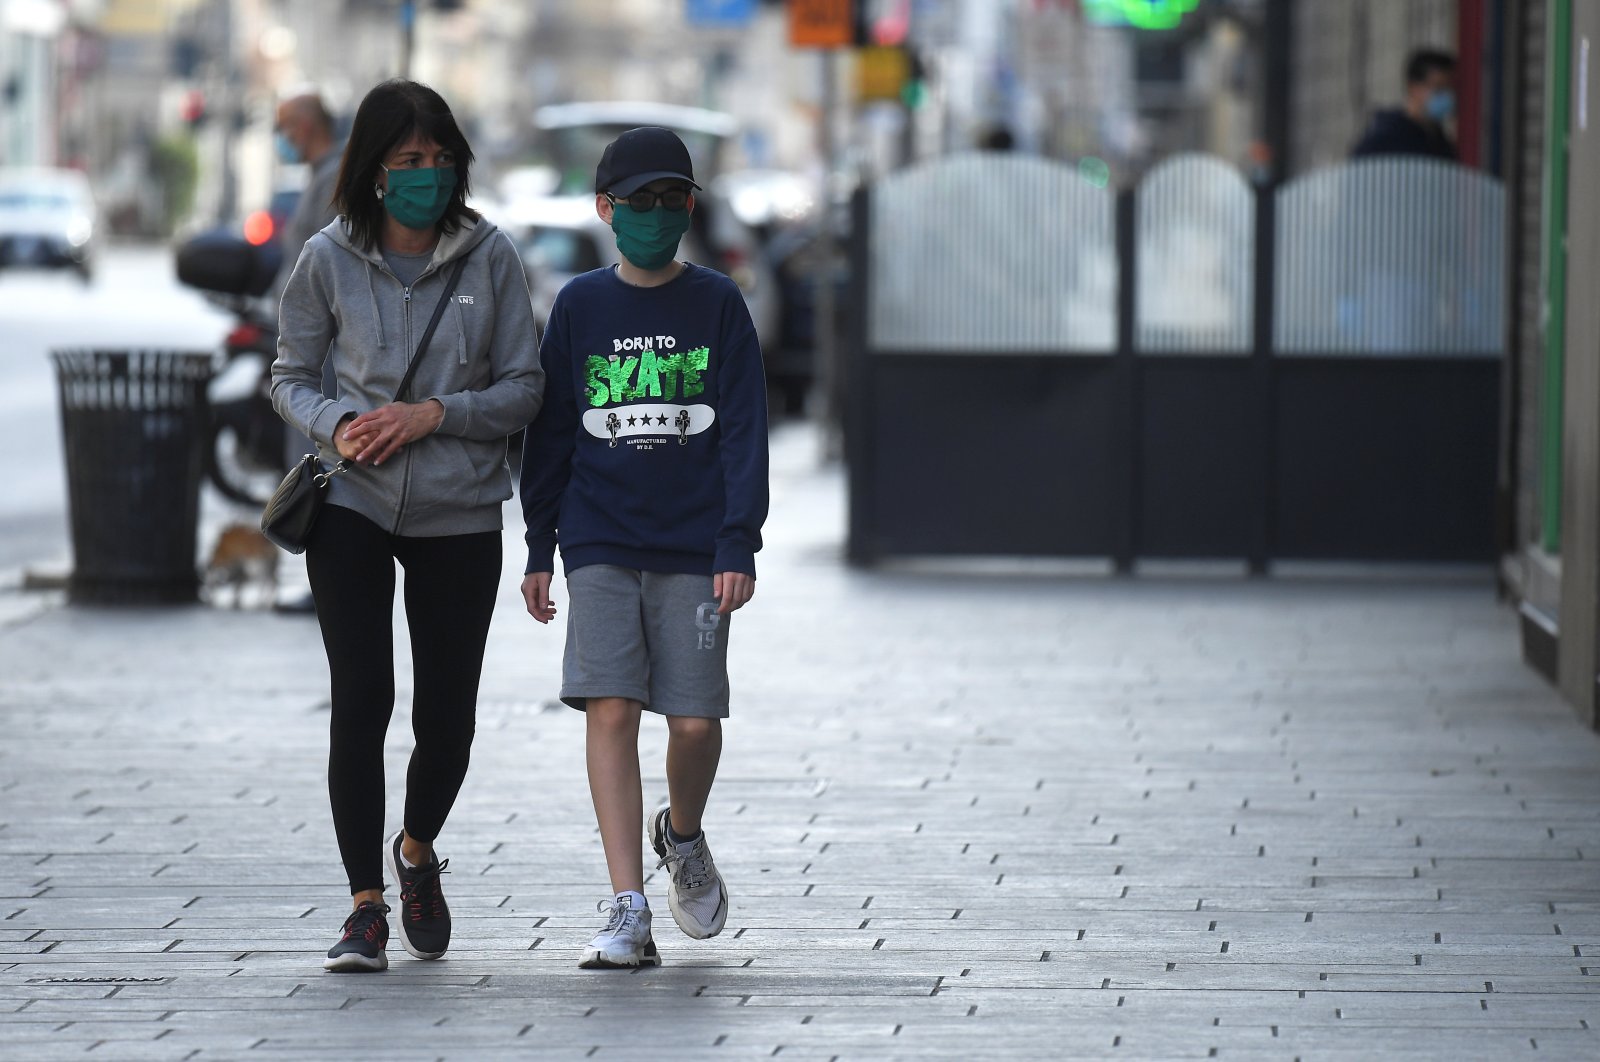 People wearing face masks walk on a street, amid the coronavirus disease (COVID-19) outbreak, in Milan, Italy April 18, 2020. (Reuters Photo)